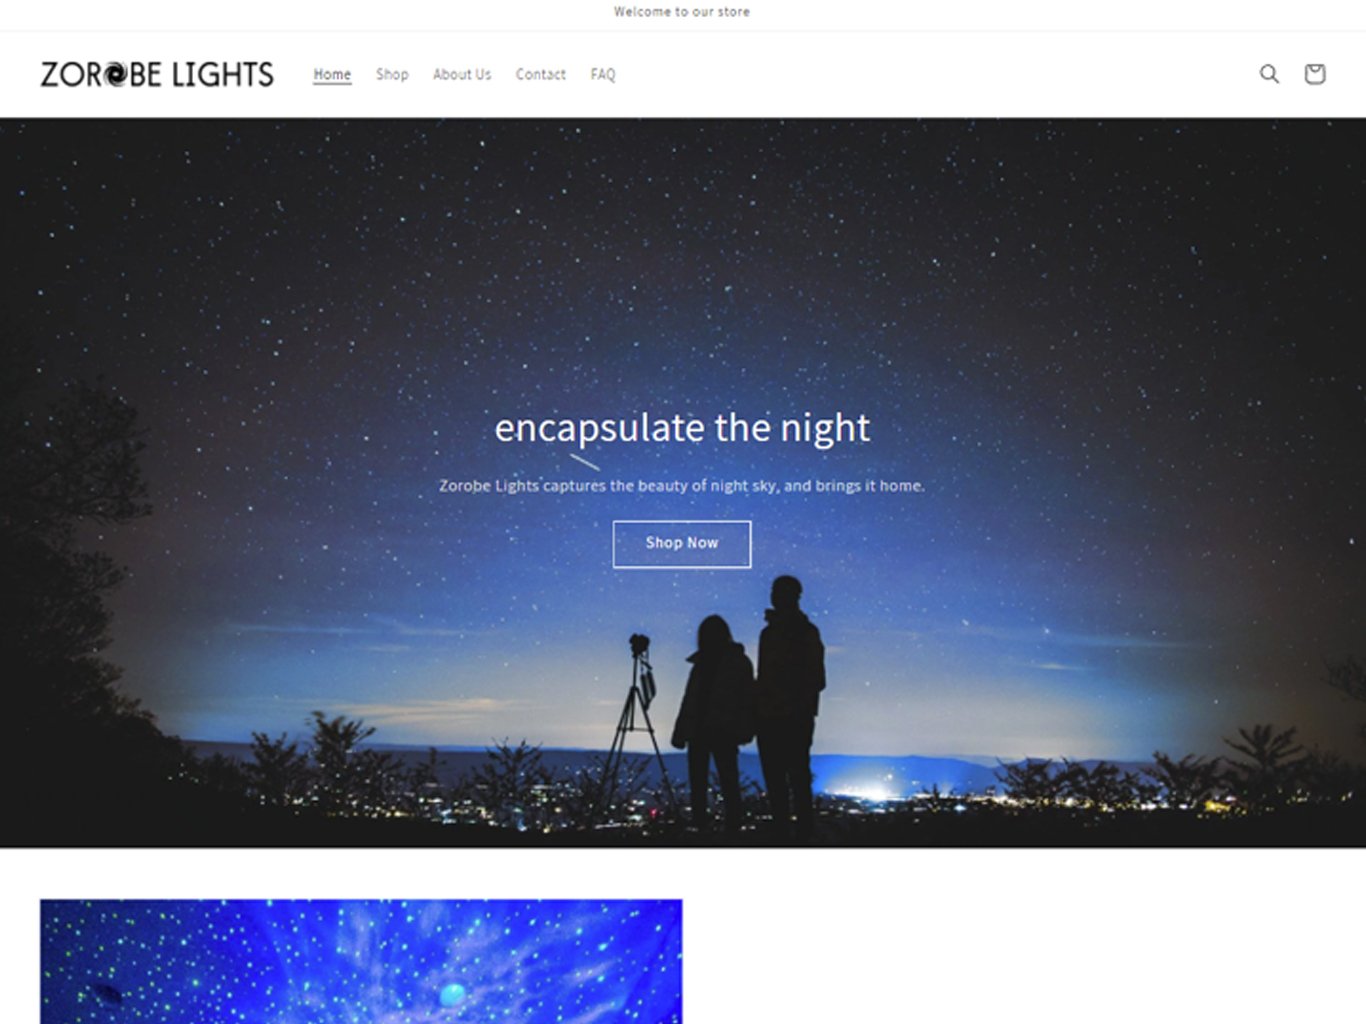 Display of homepage for fictional store, Zorobe Lights, on Shopify.